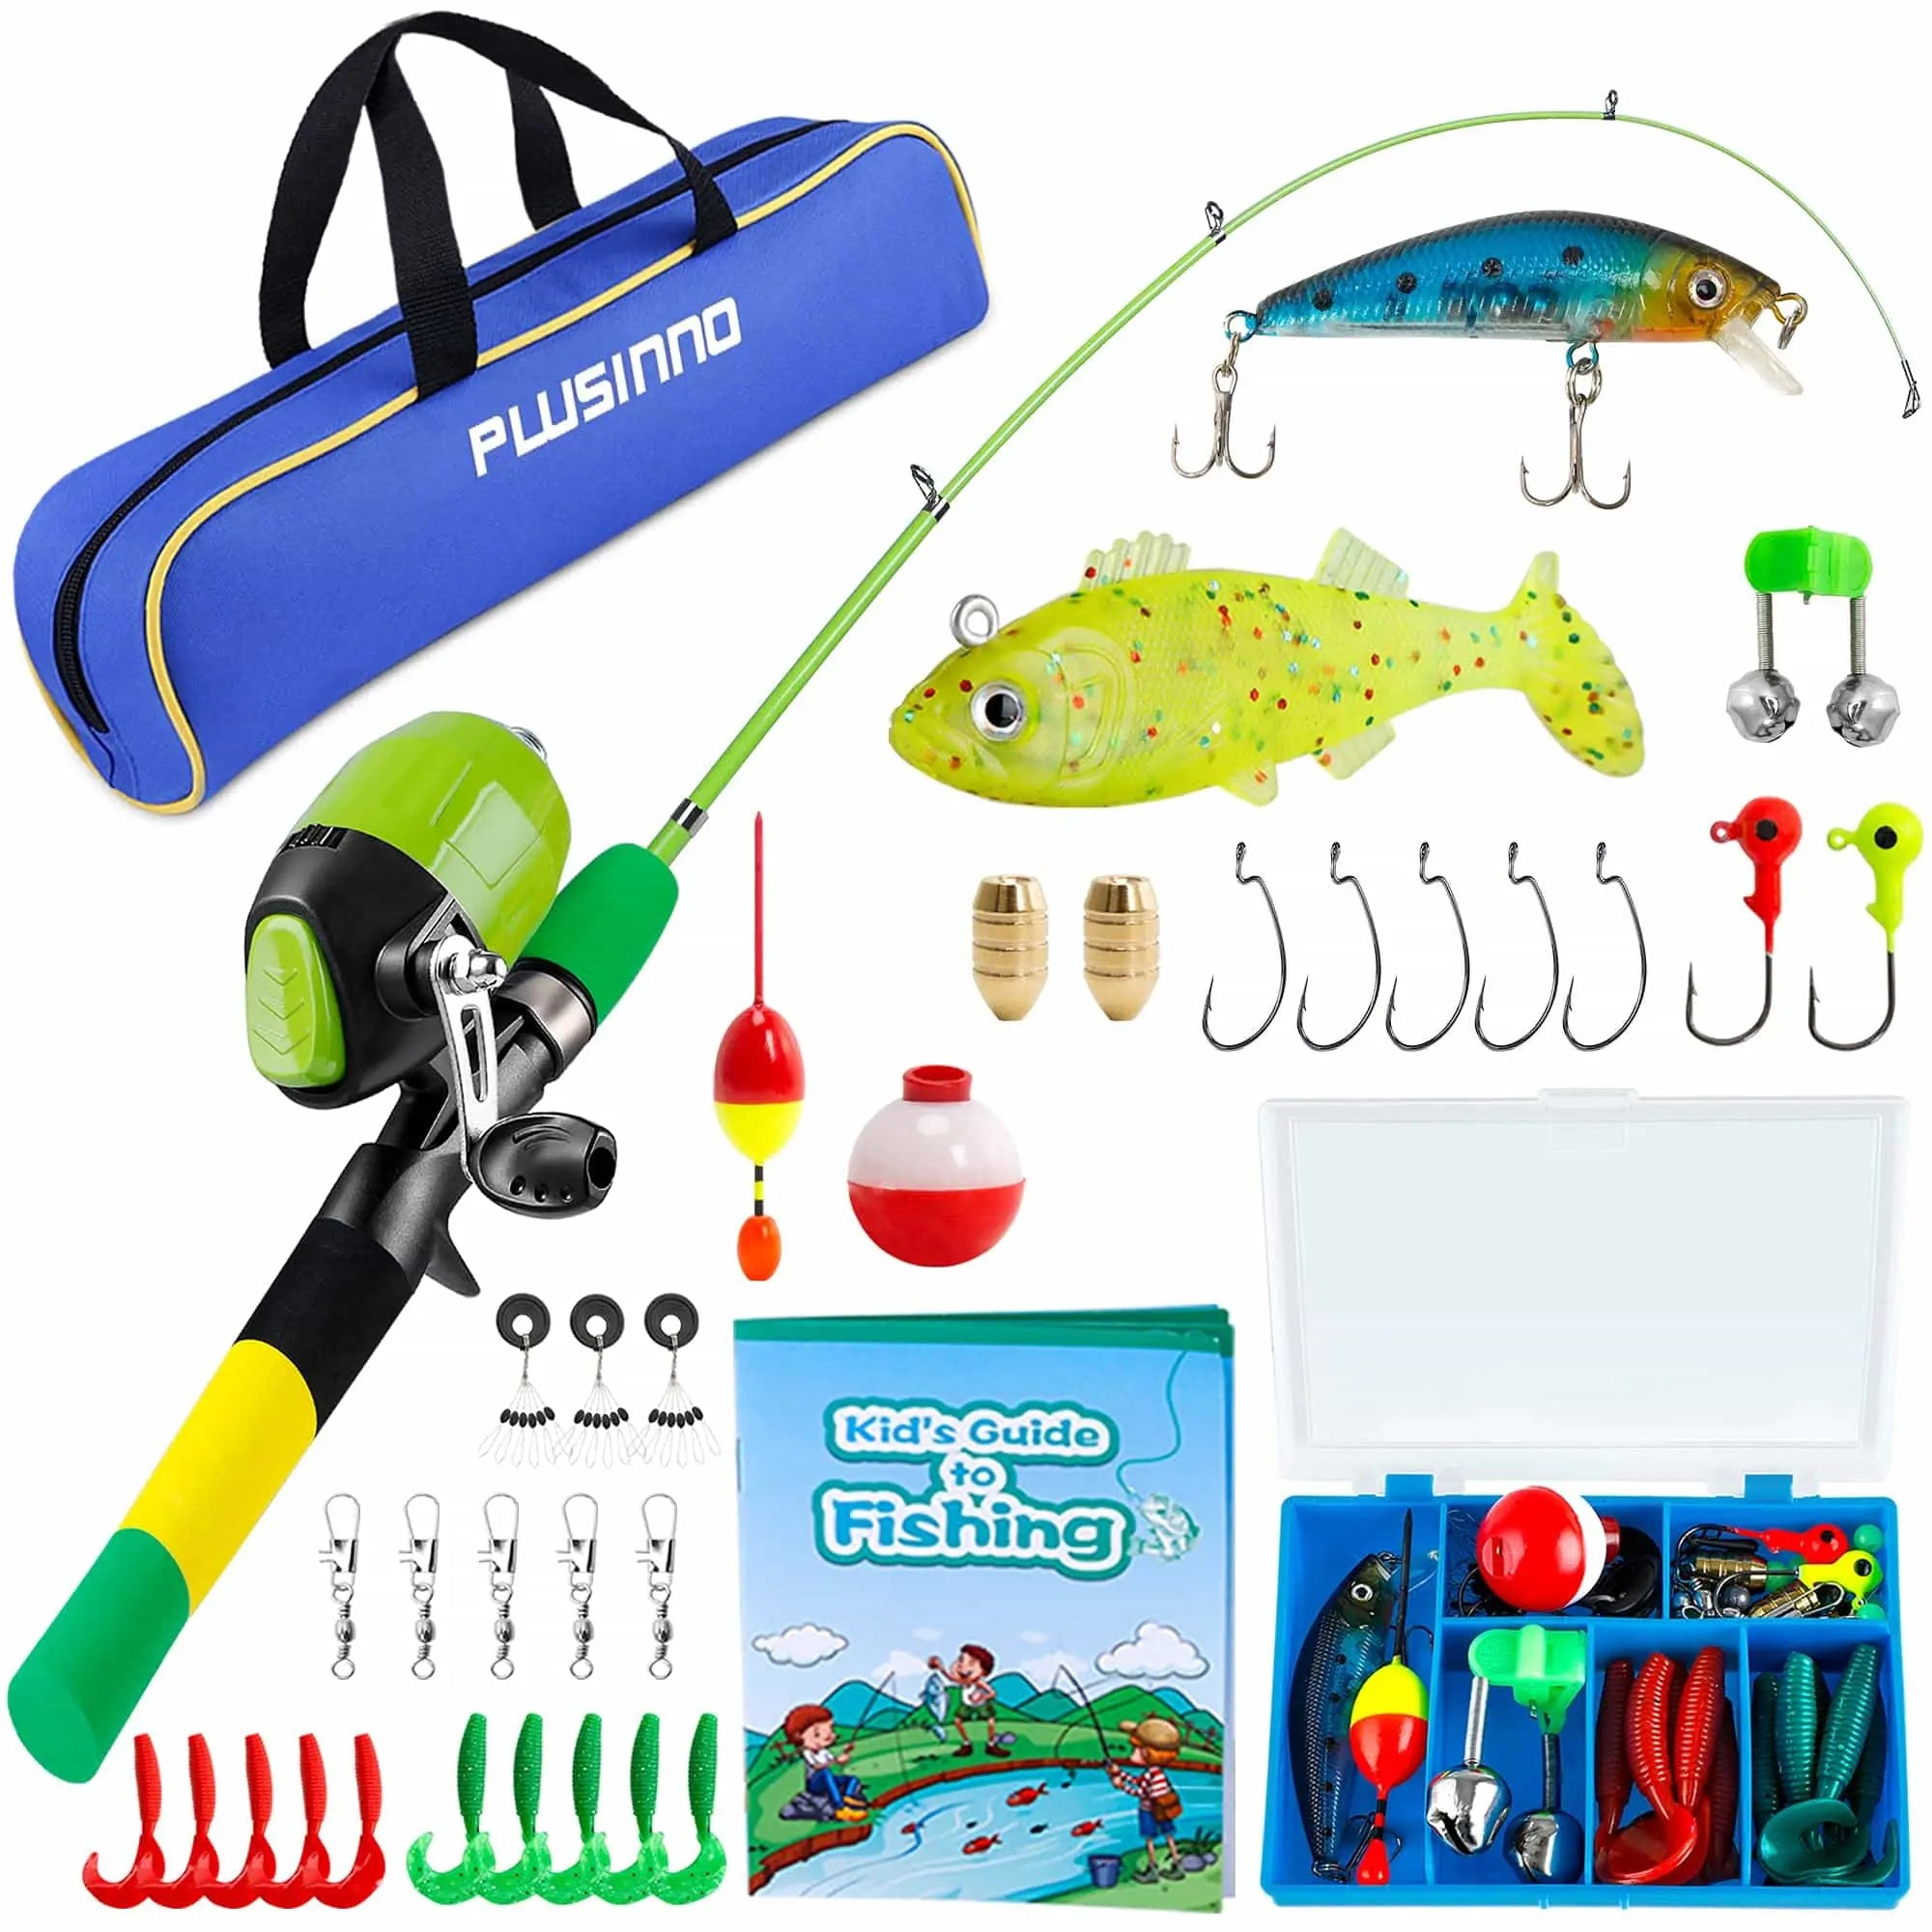 LEOFISHING Kids Fishing Pole Set with Full Starter Kits Portable Telescopic  Fishing Rod and Spincast Reel with a Fishing Net and Bucket for Boys